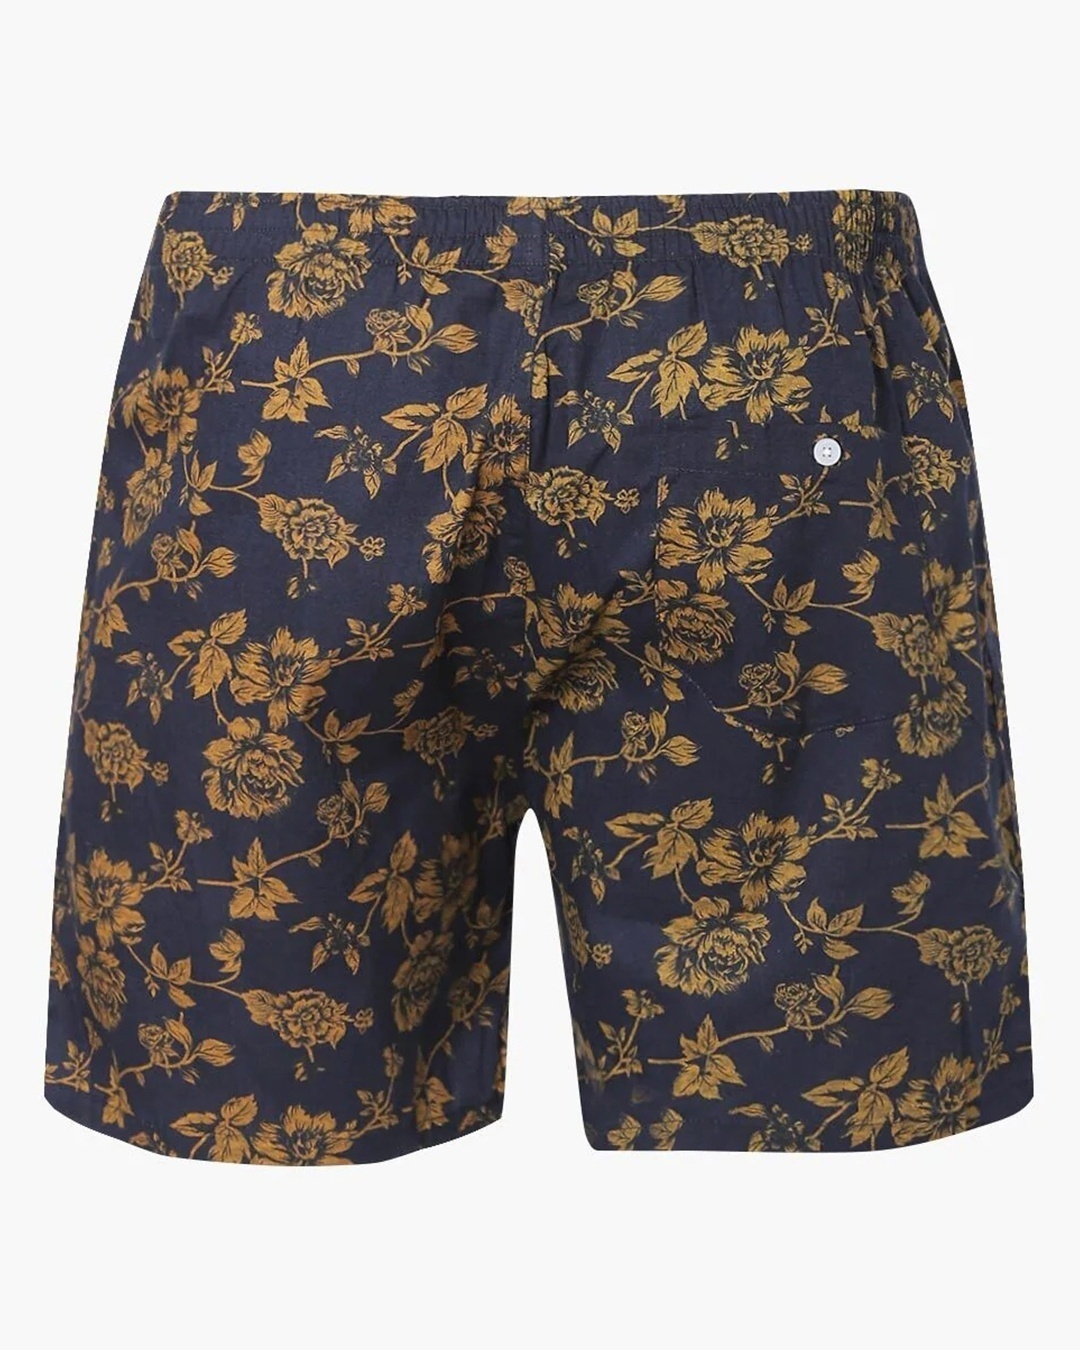 Shop Men's All Over Printed Cotton Boxers (Pack of 3)